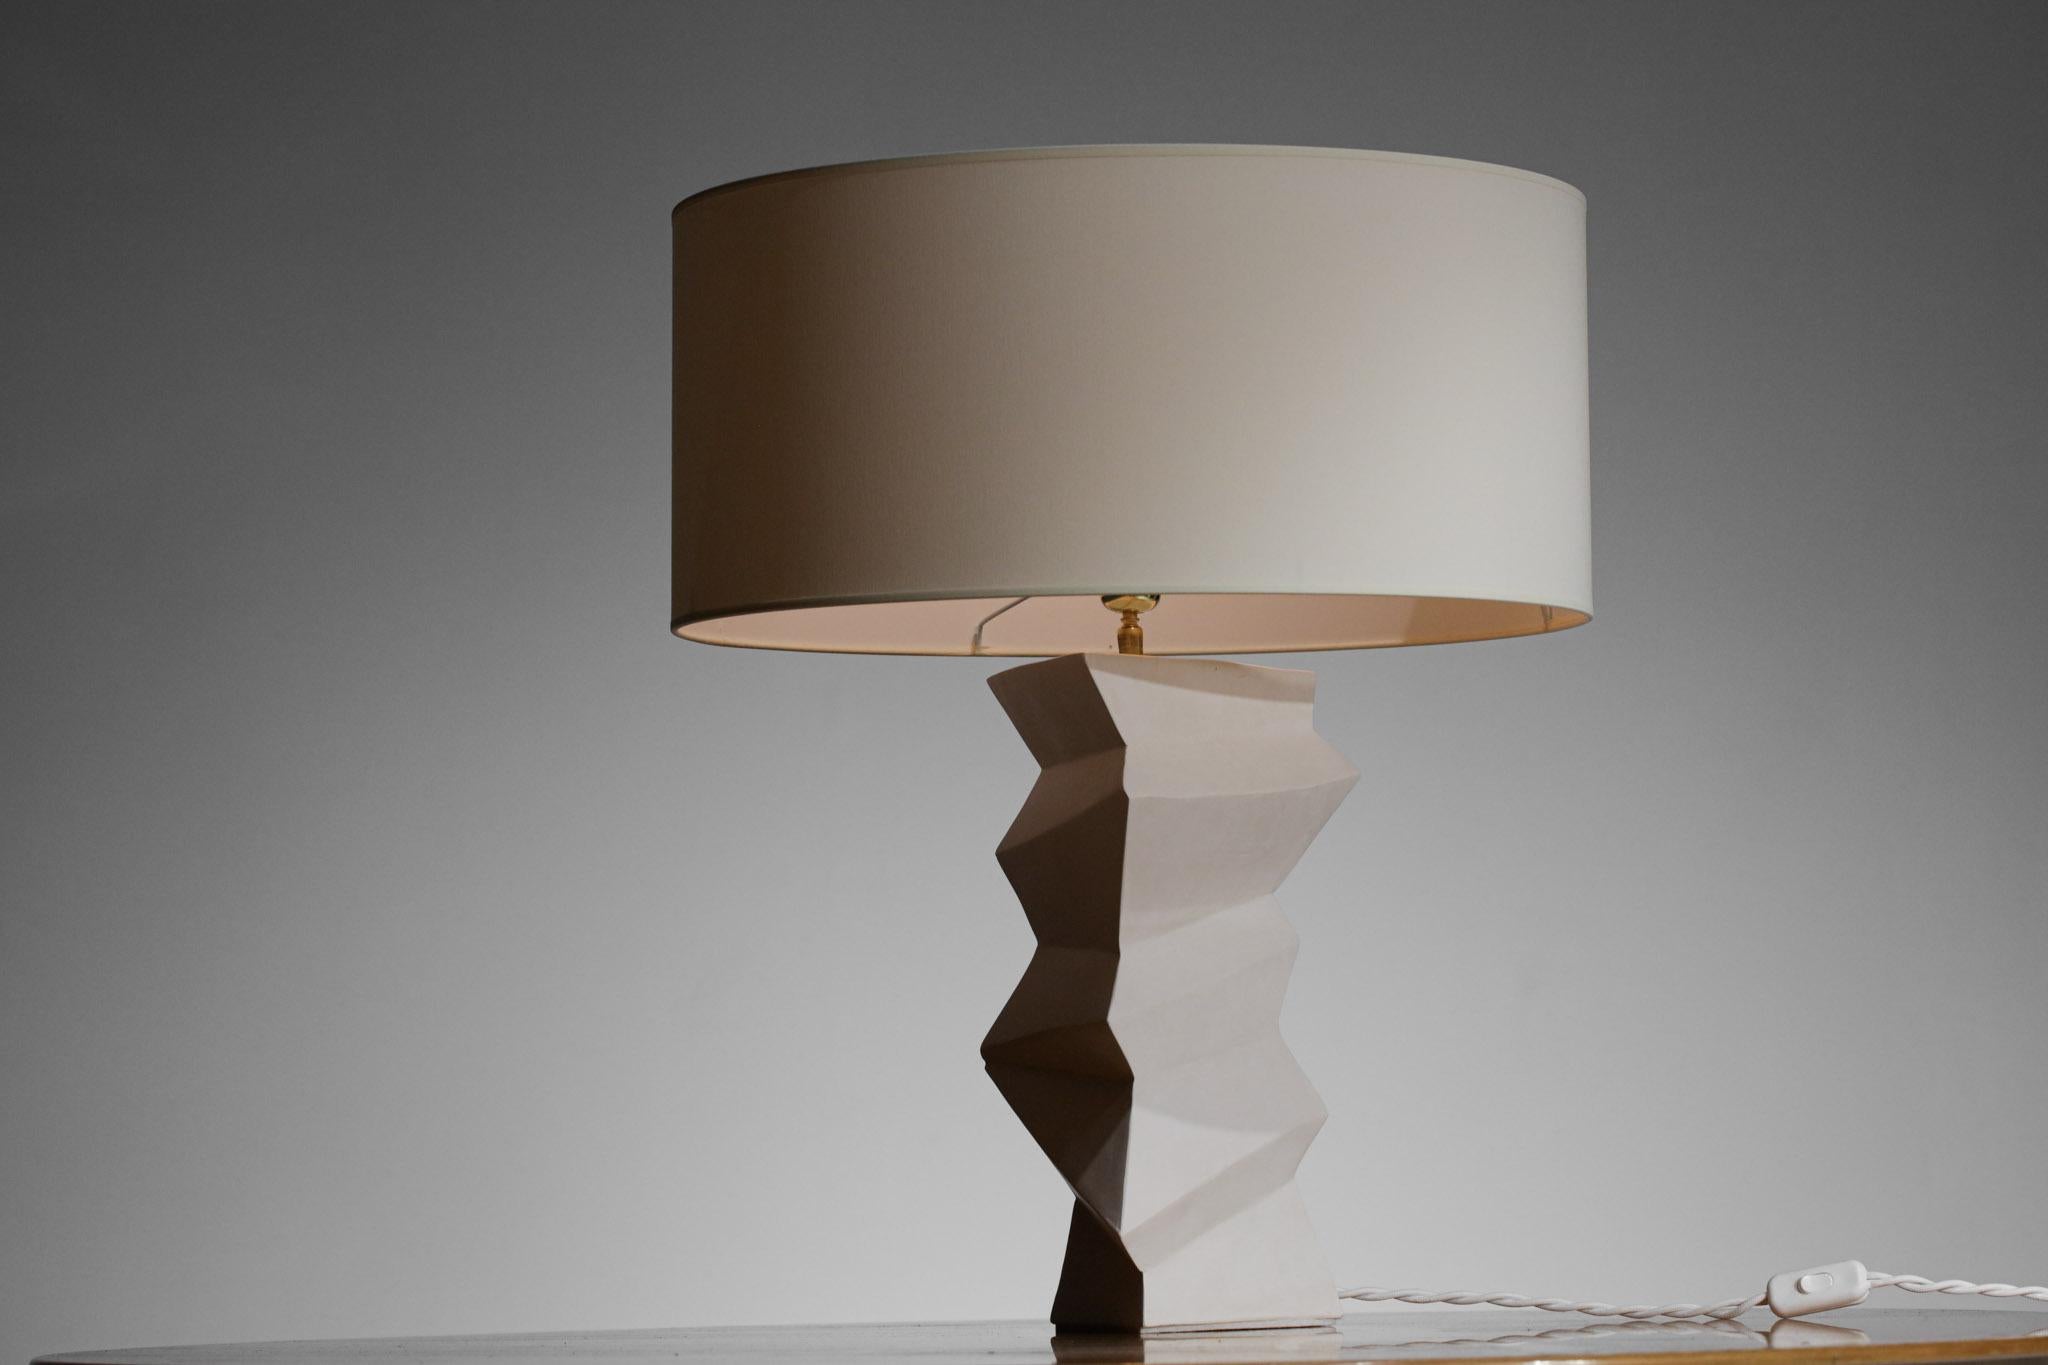 Modern French desk or bedside lamp in the style of Giacometti. Handcrafted, white plaster triangular faceted structure of the base, new custom-made lampshade. Imposing lamp is sculptural and very decorative. Excellent condition (see photos).